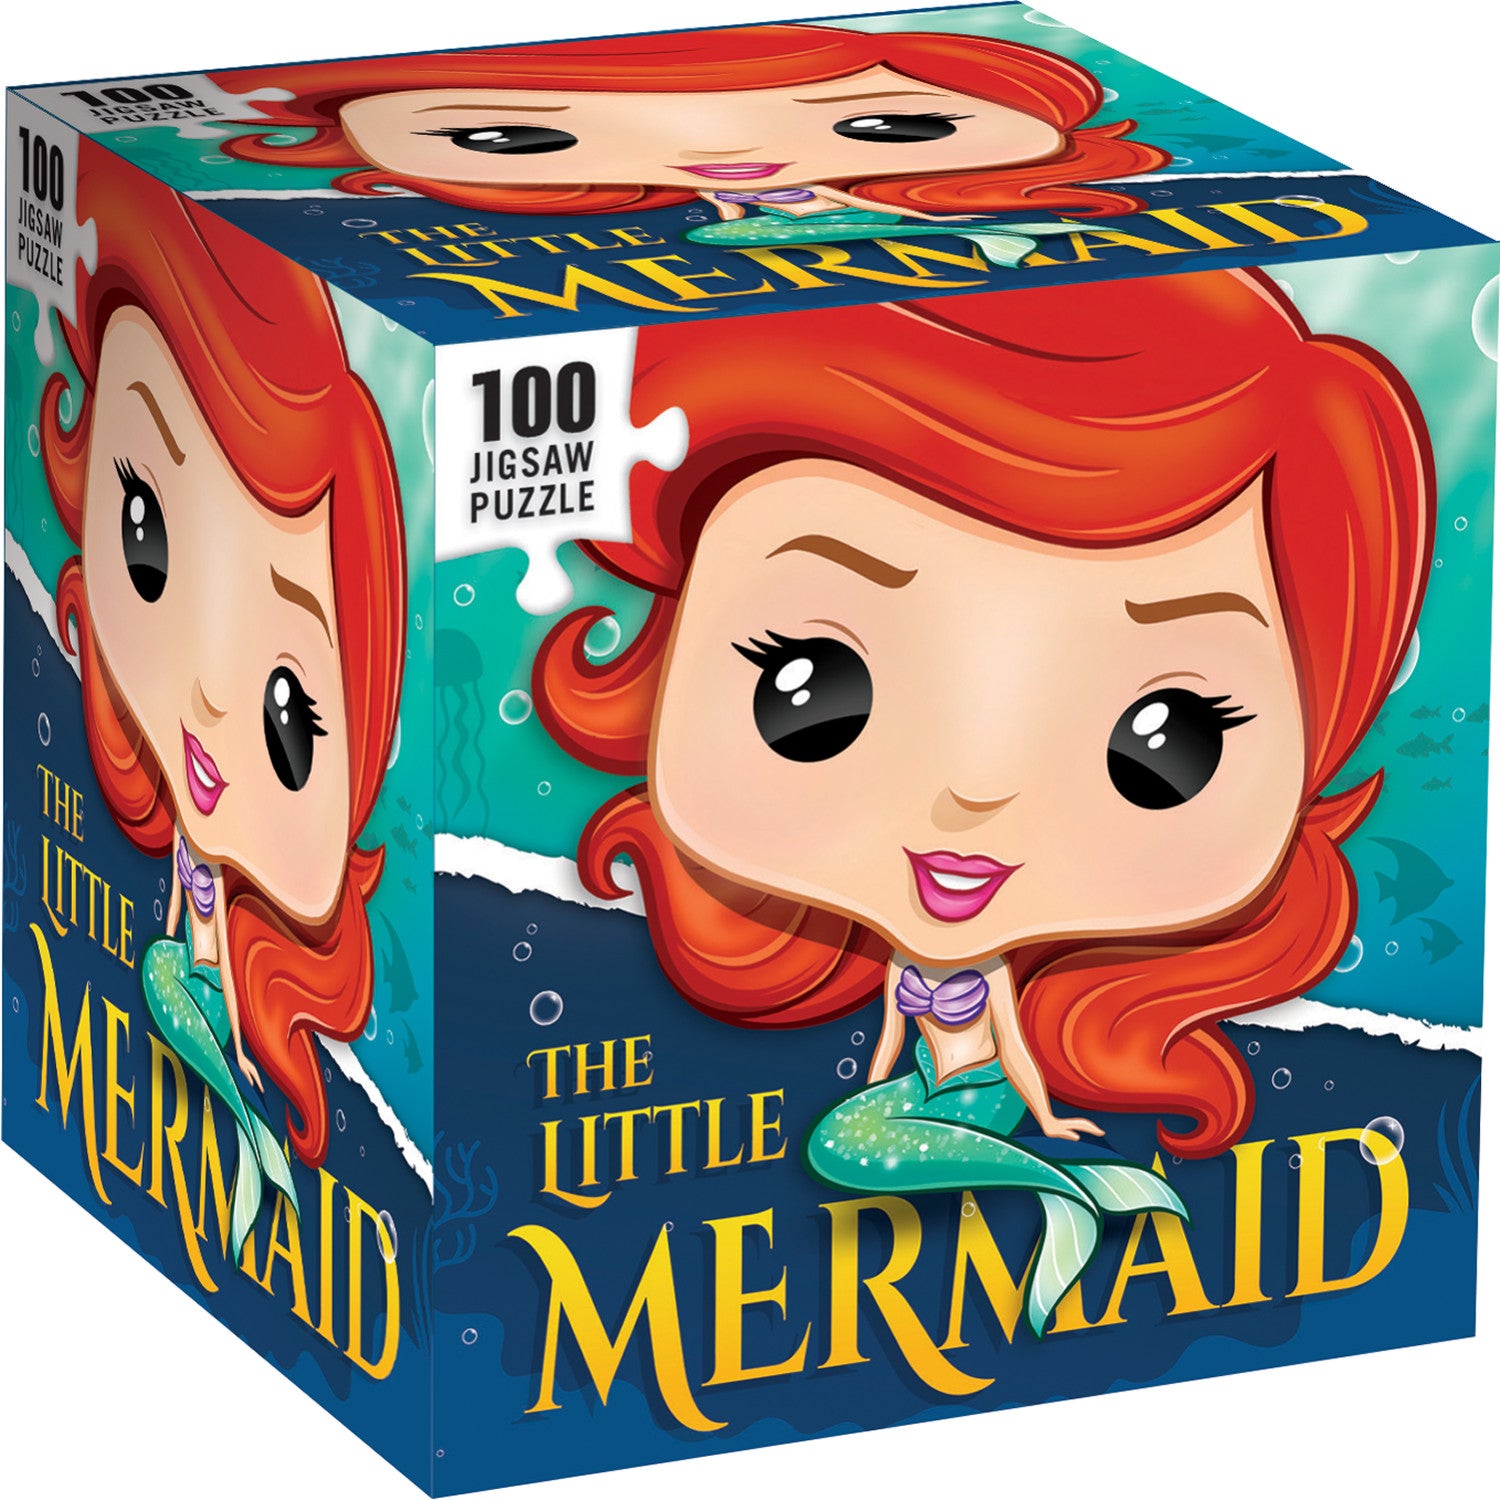 The Little Mermaid 100 Piece Jigsaw Puzzle